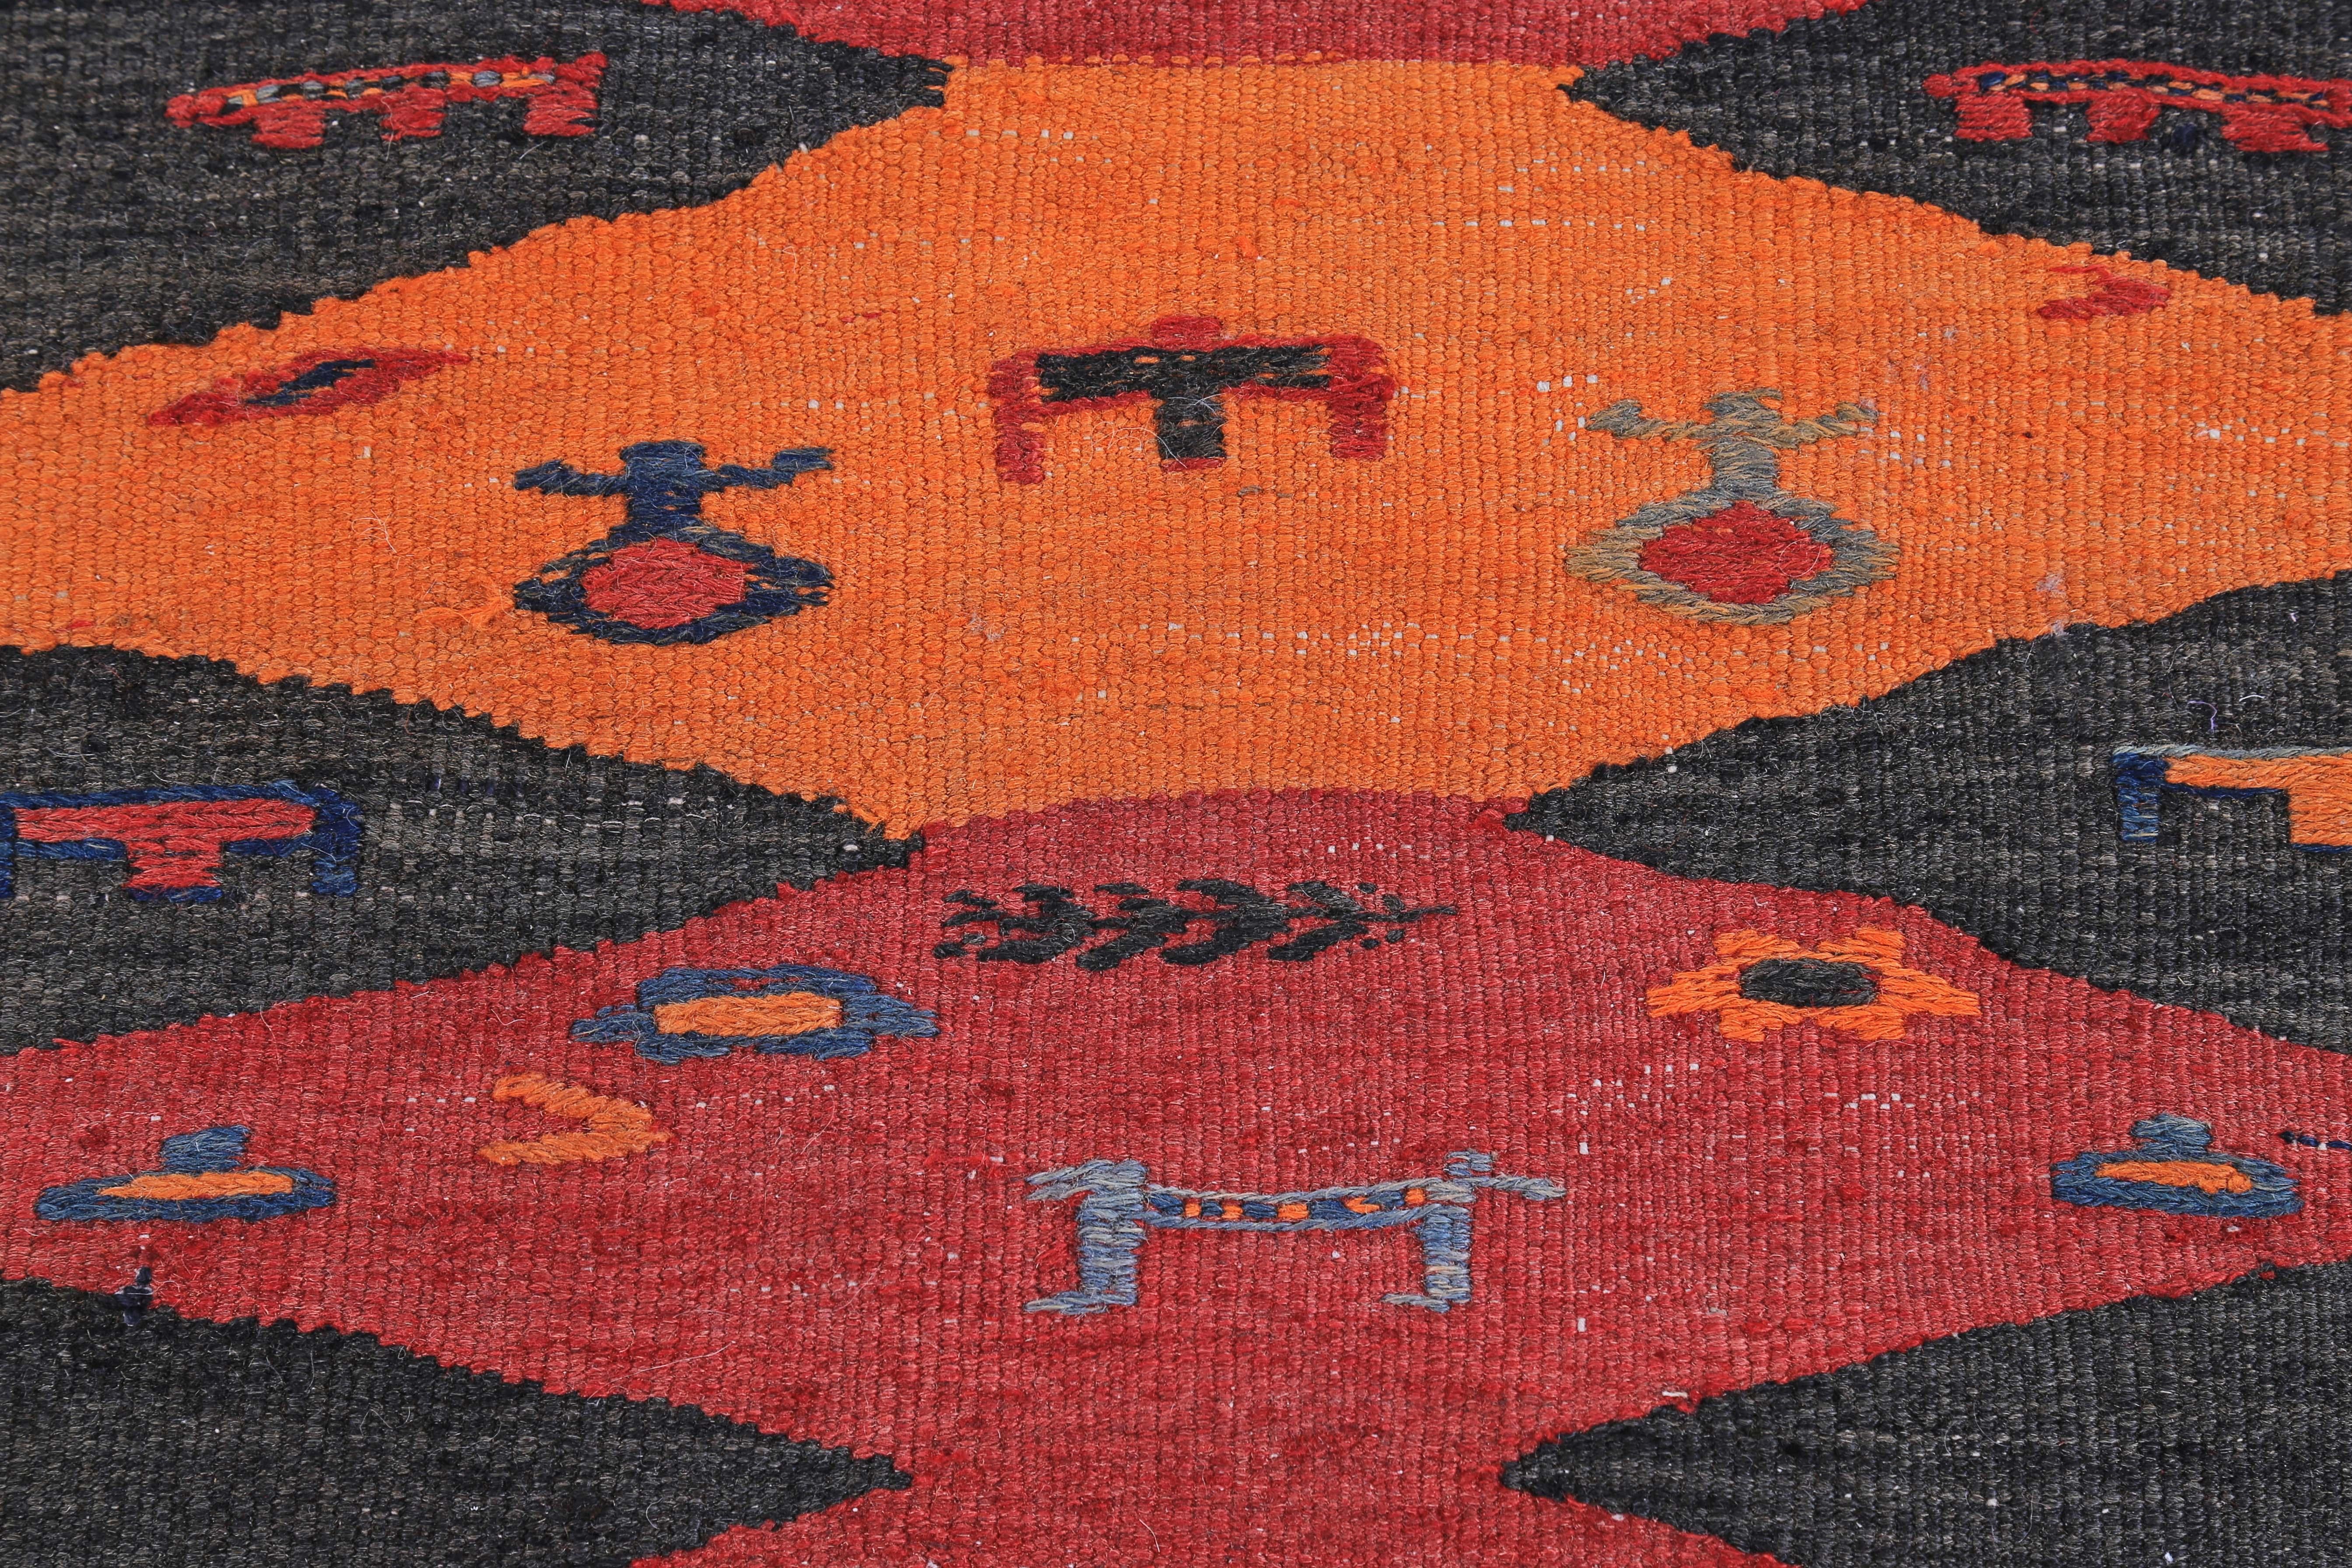 Hand-Woven Modern Turkish Kilim Rug with Red and Orange Diamond Design in Black Field For Sale